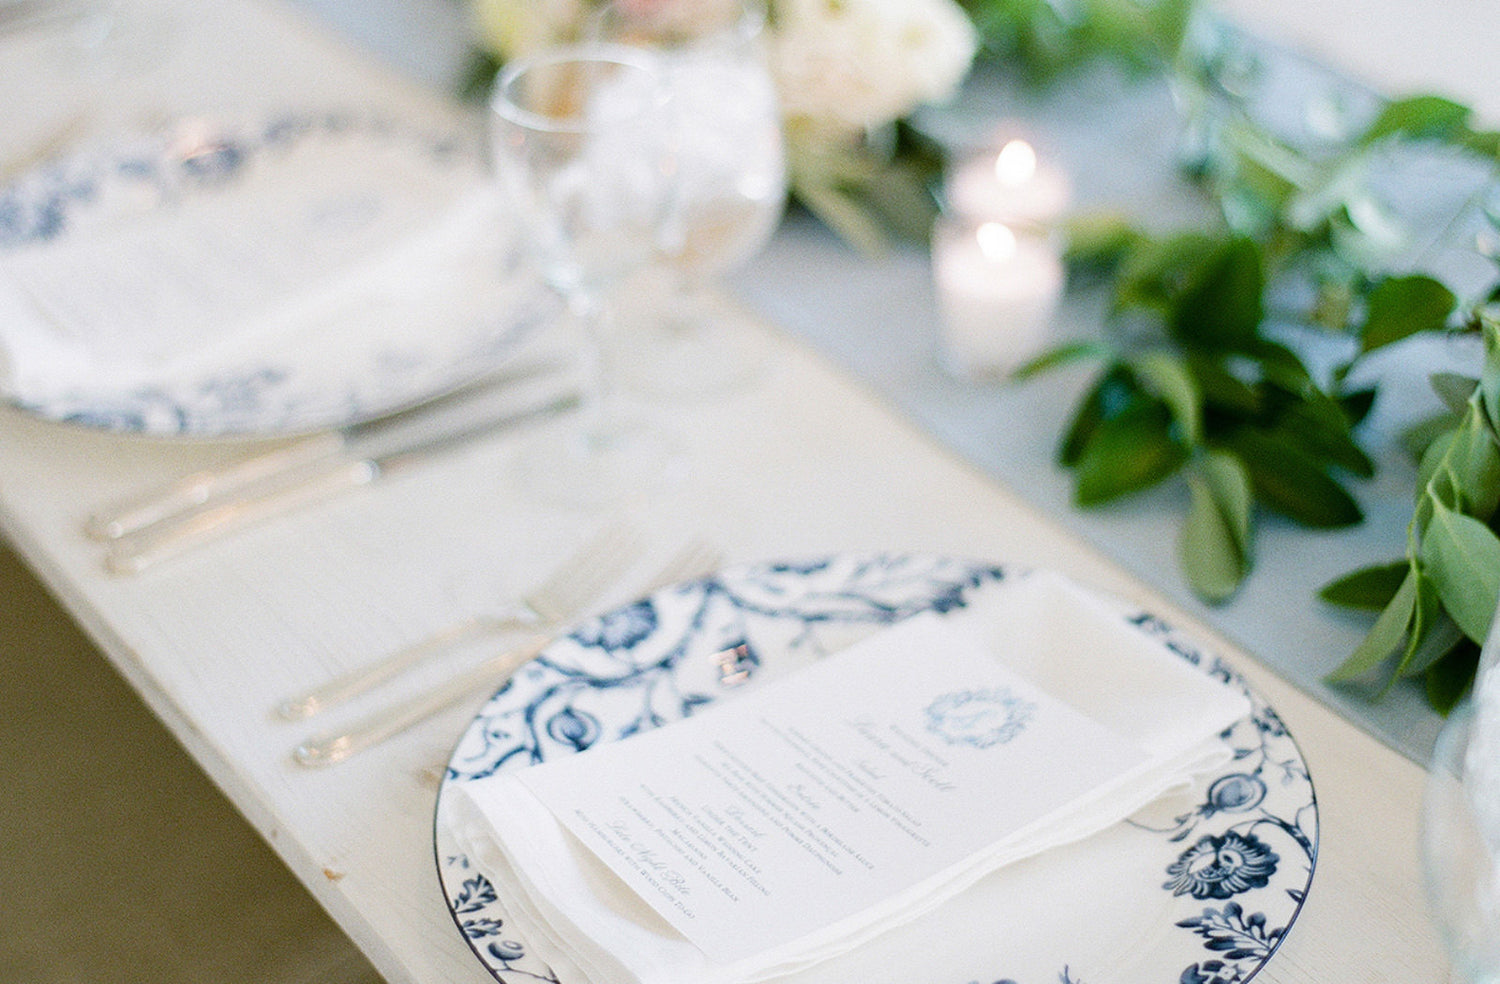 groomsmen gifts - place settings at a wedding